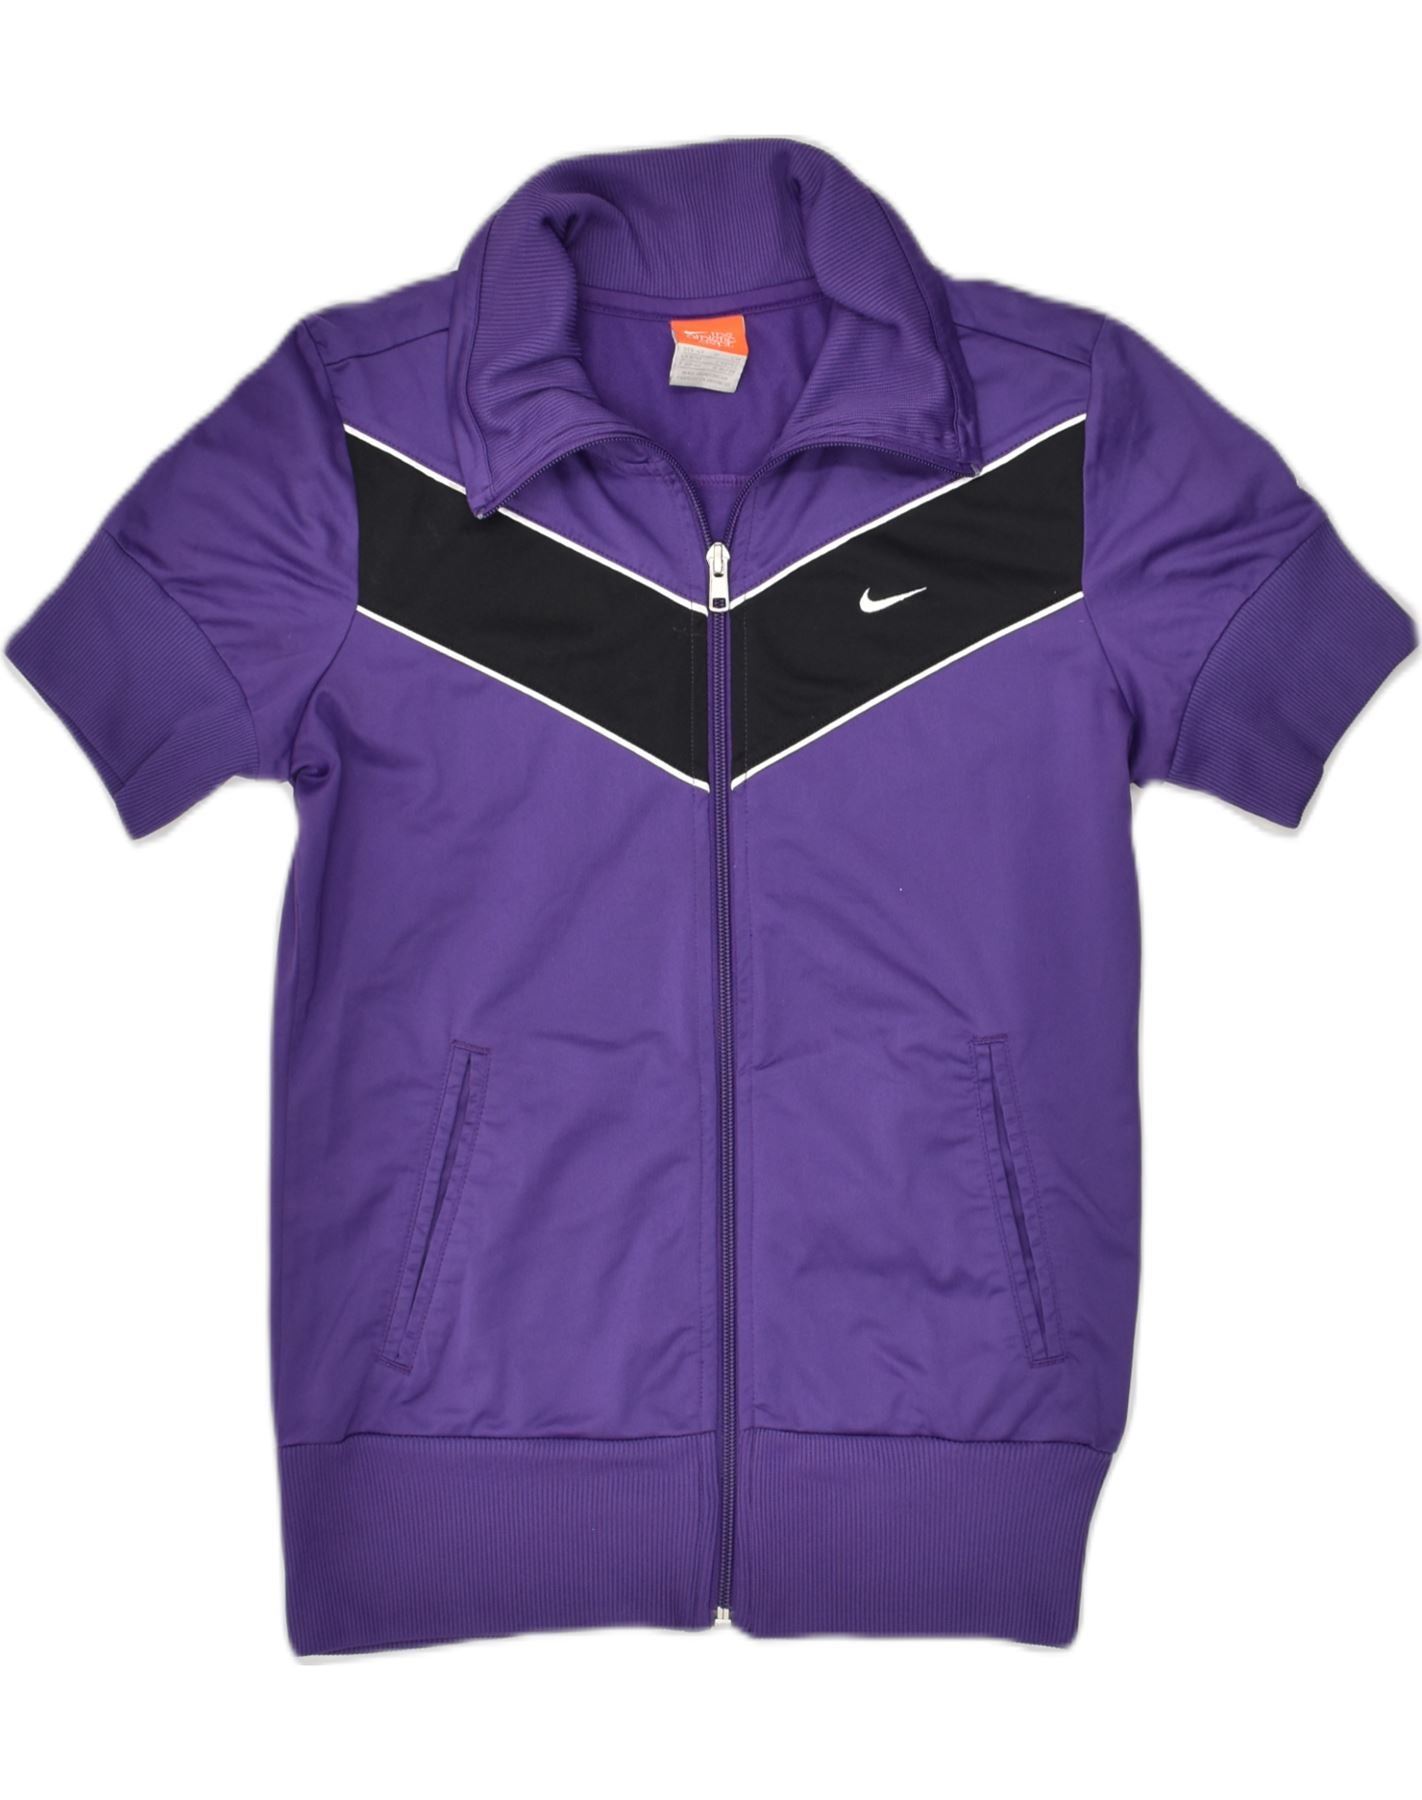 NIKE Womens Short Sleeve Tracksuit Top Jacket UK 8-10 Small Purple, Vintage & Second-Hand Clothing Online